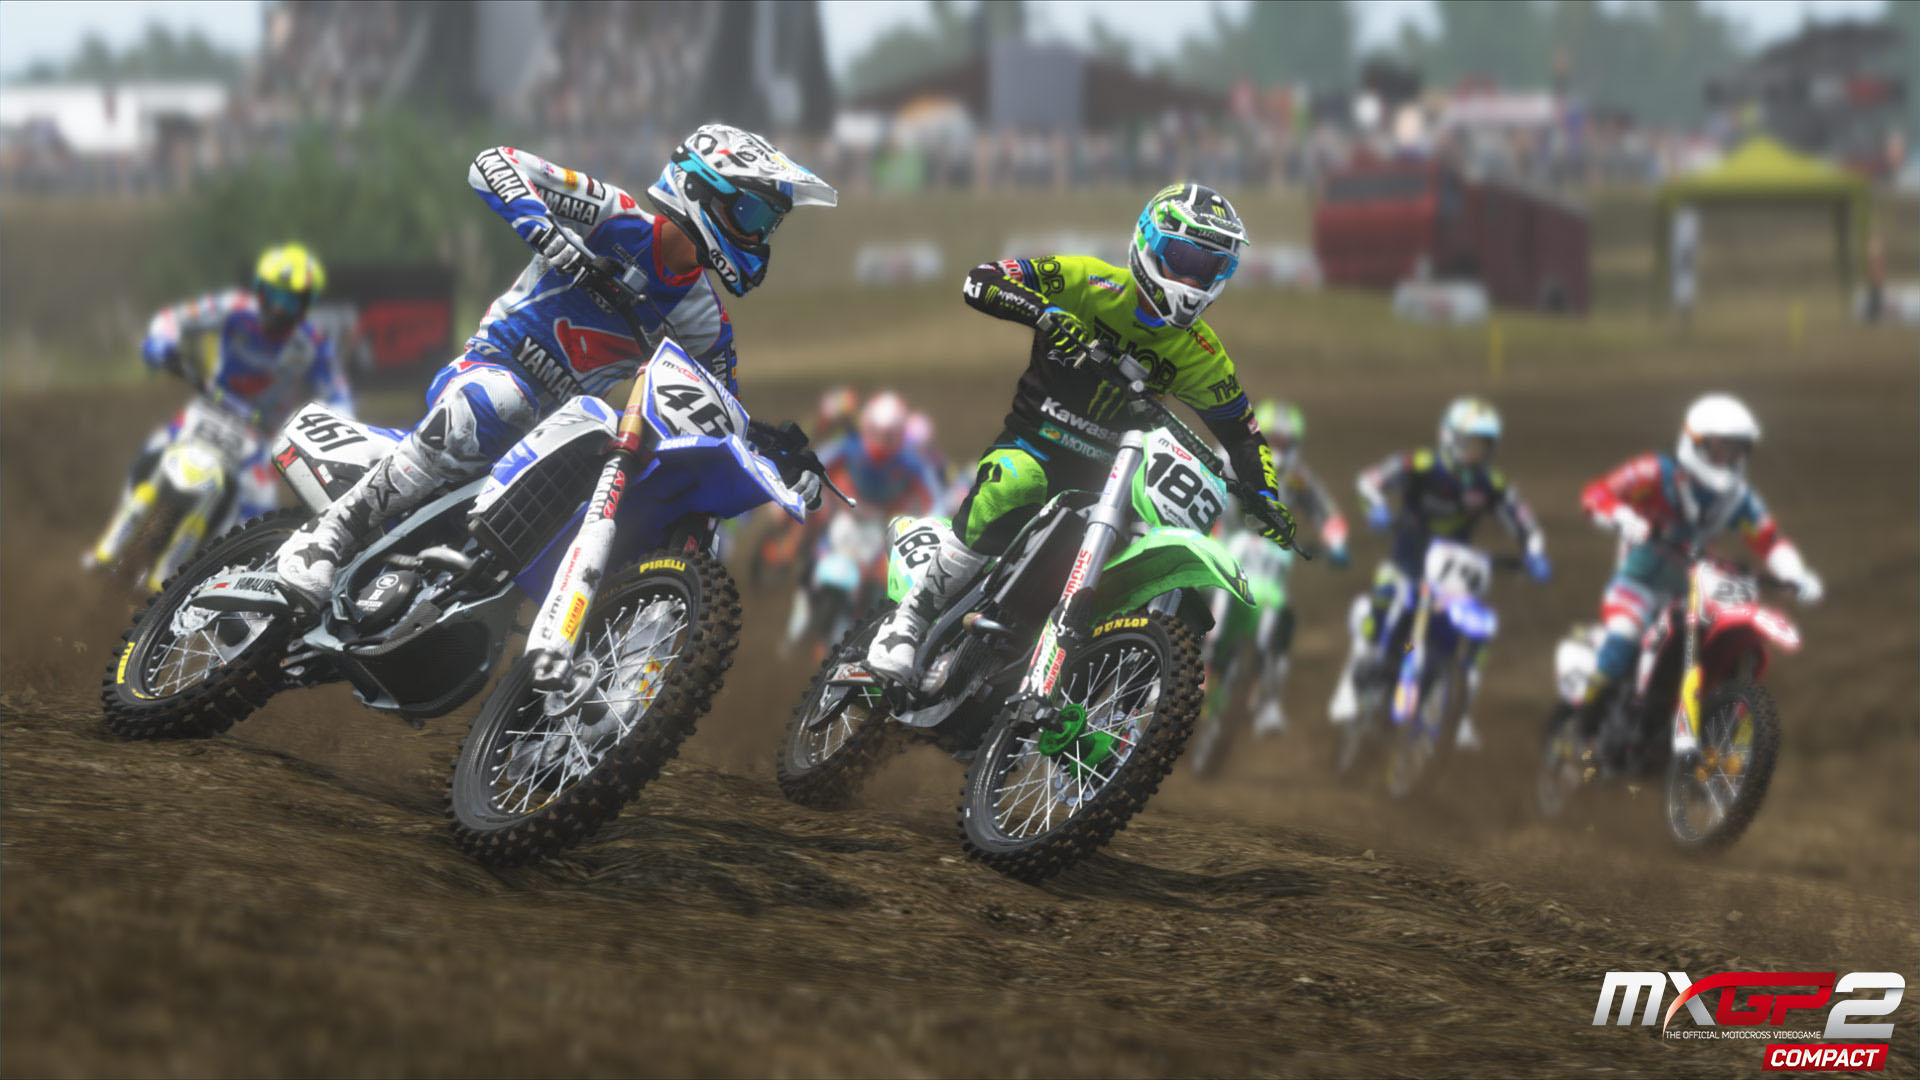 Motocross videogame. Mxgp2 - the Official Motocross videogame. MXGP the Official Motocross videogame. Игра MXGP 2. MXGP - the Official Motocross videogame Compact.